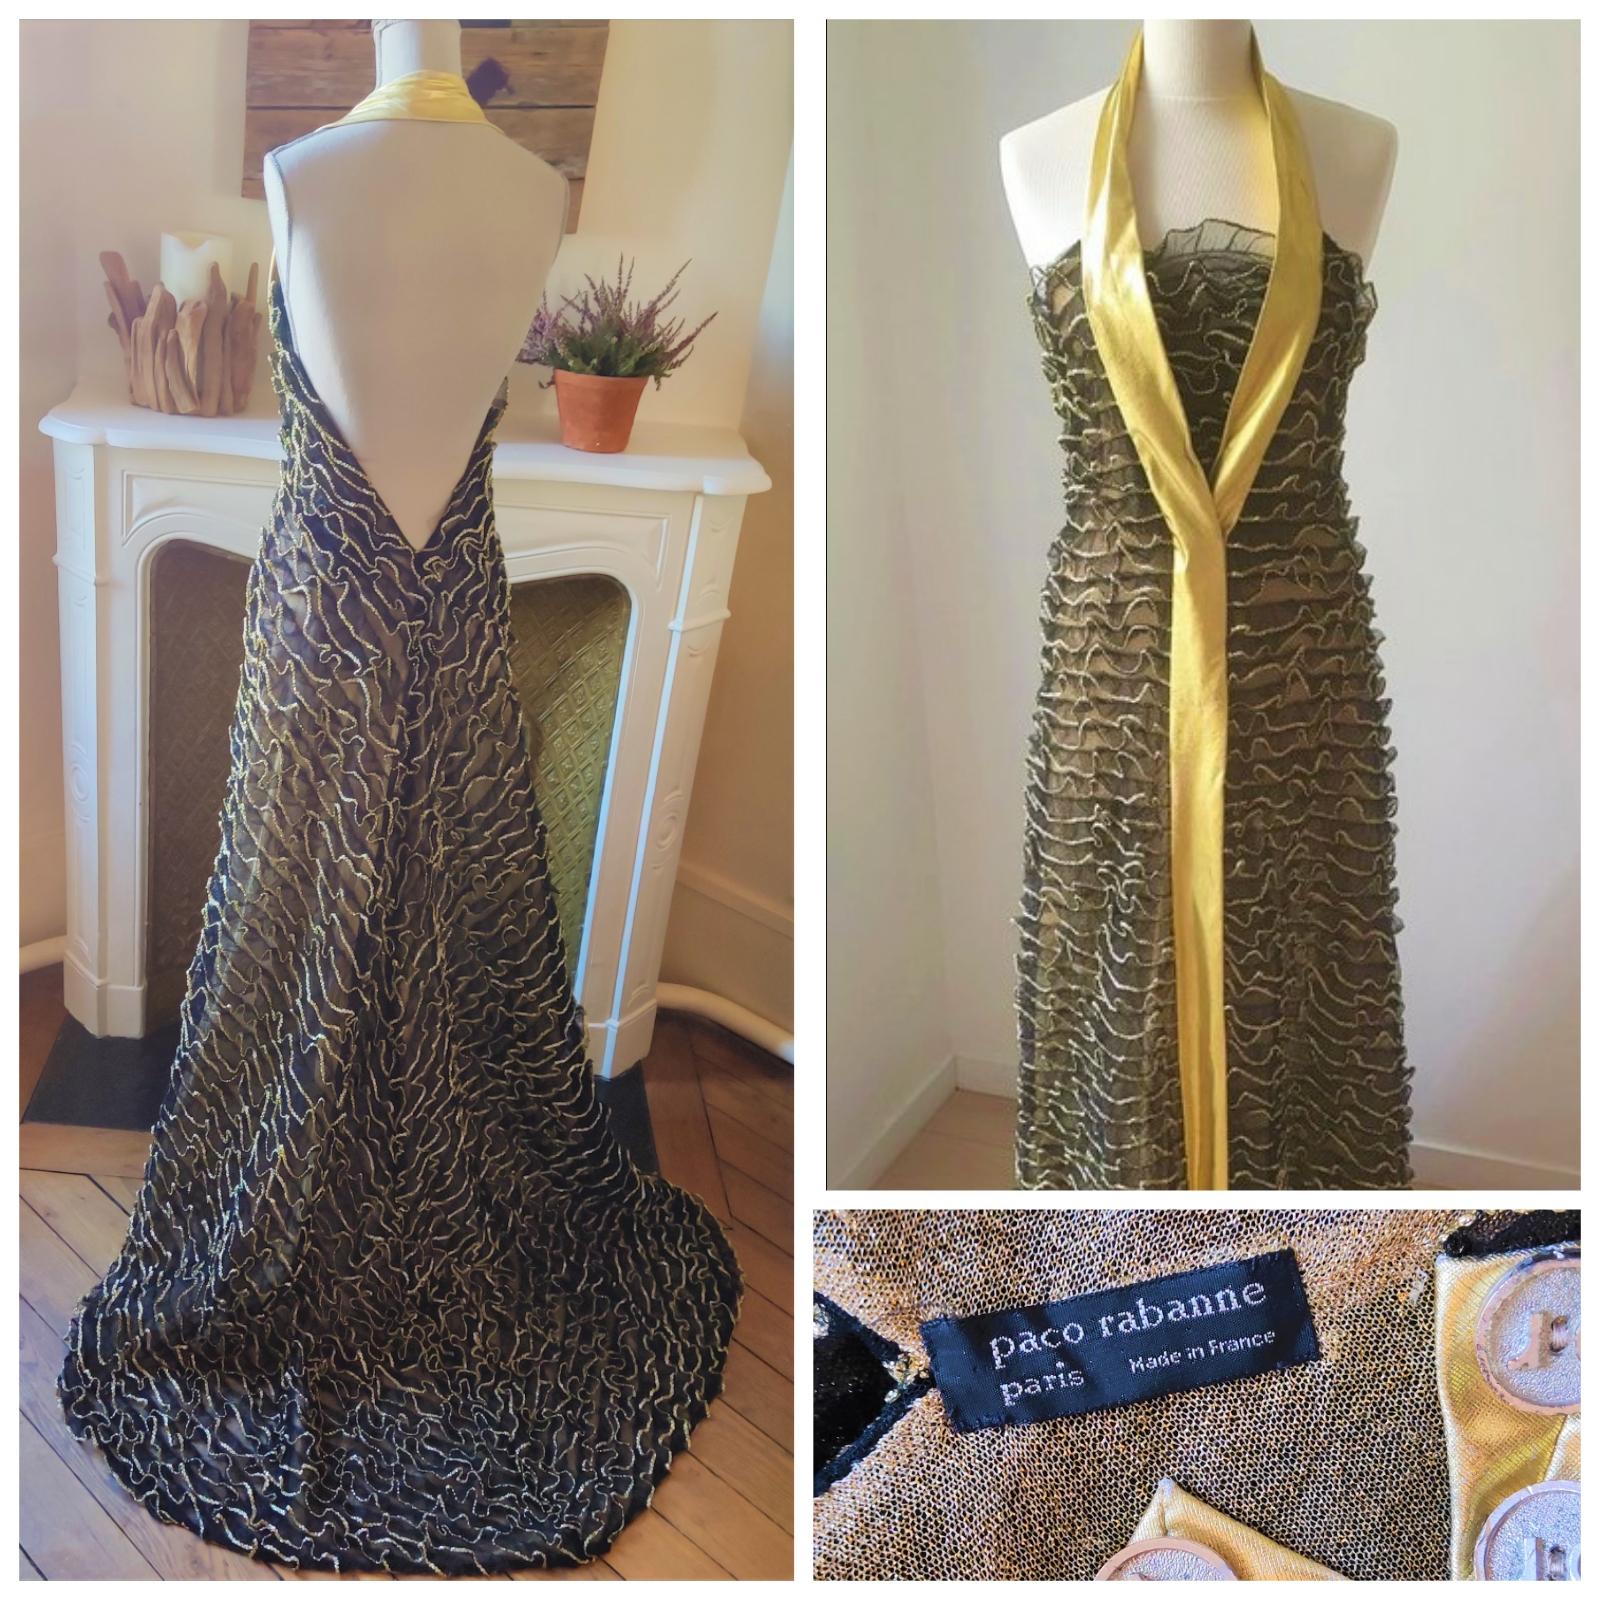 Important Early PACO RABANNE vintage gown dress.
4 pieces of PACO RABANNE metal tag at the buttoms of the dress.
Wonderful silhouette. 

VERY GOOD condition!
Closure: small clips. 
The tube top is attached to the dress with